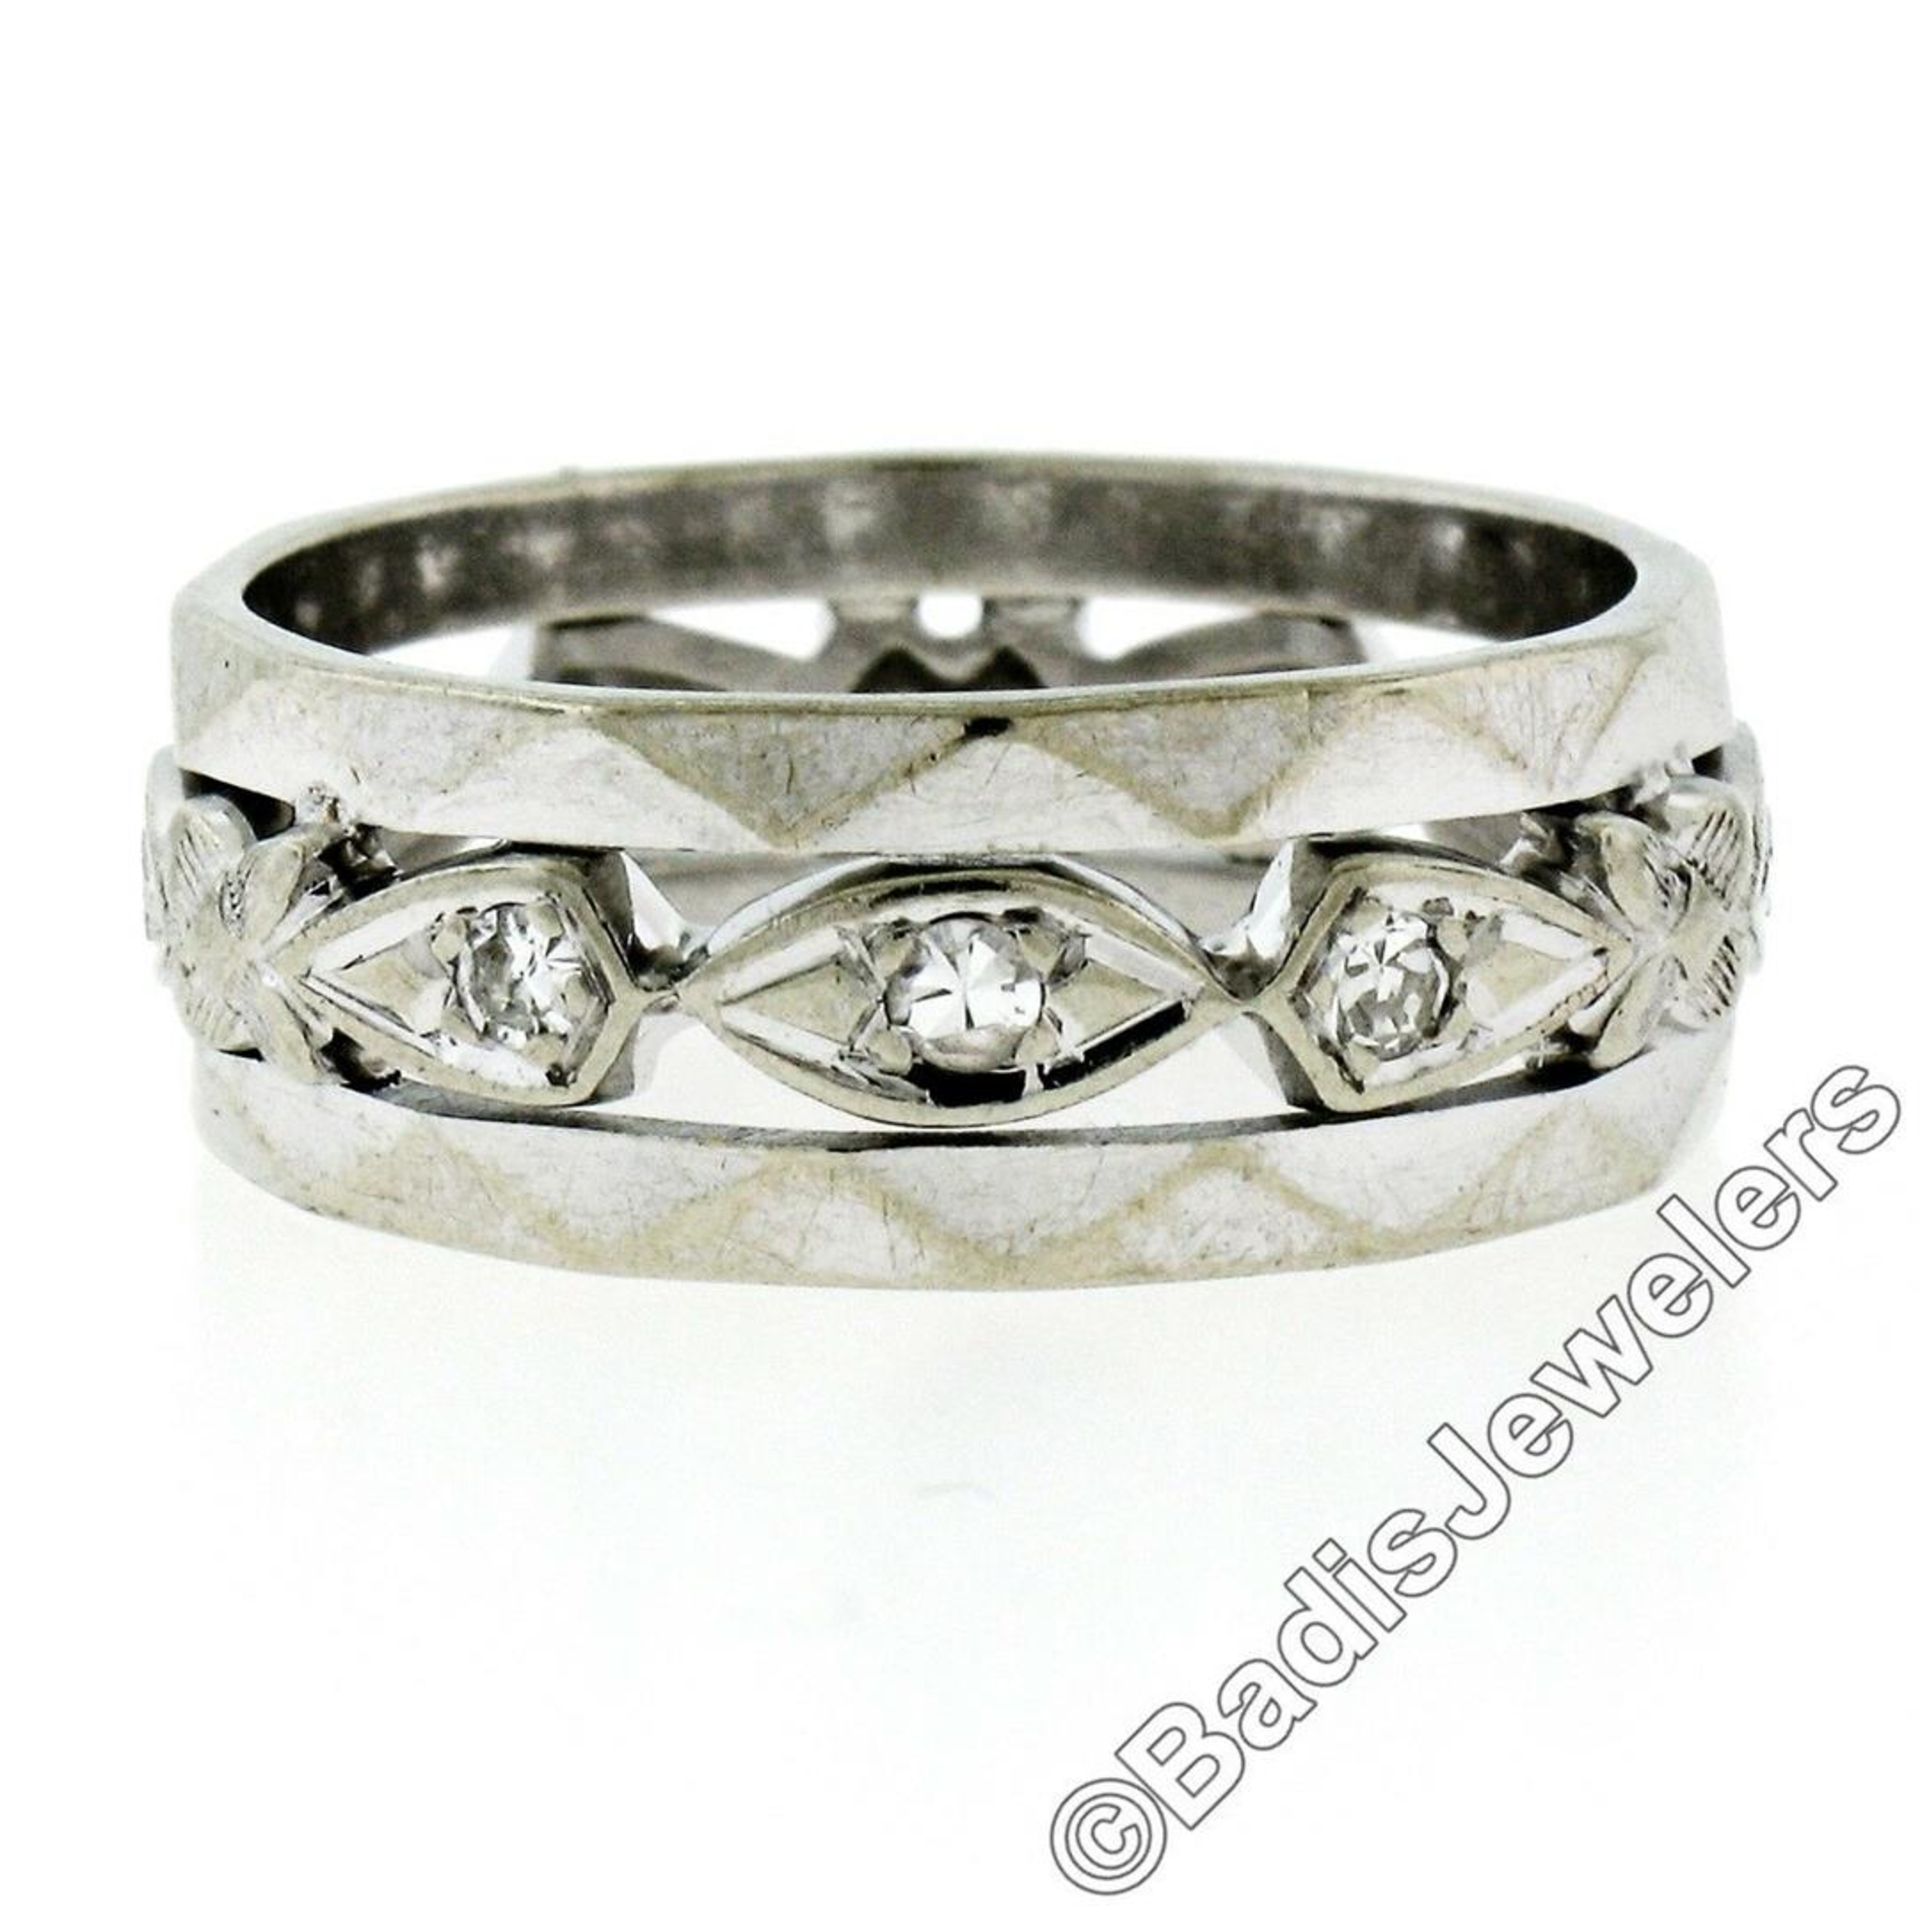 Antique 14kt White Gold 0.20ctw Diamond 7mm Eternity Band Ring - Image 7 of 8